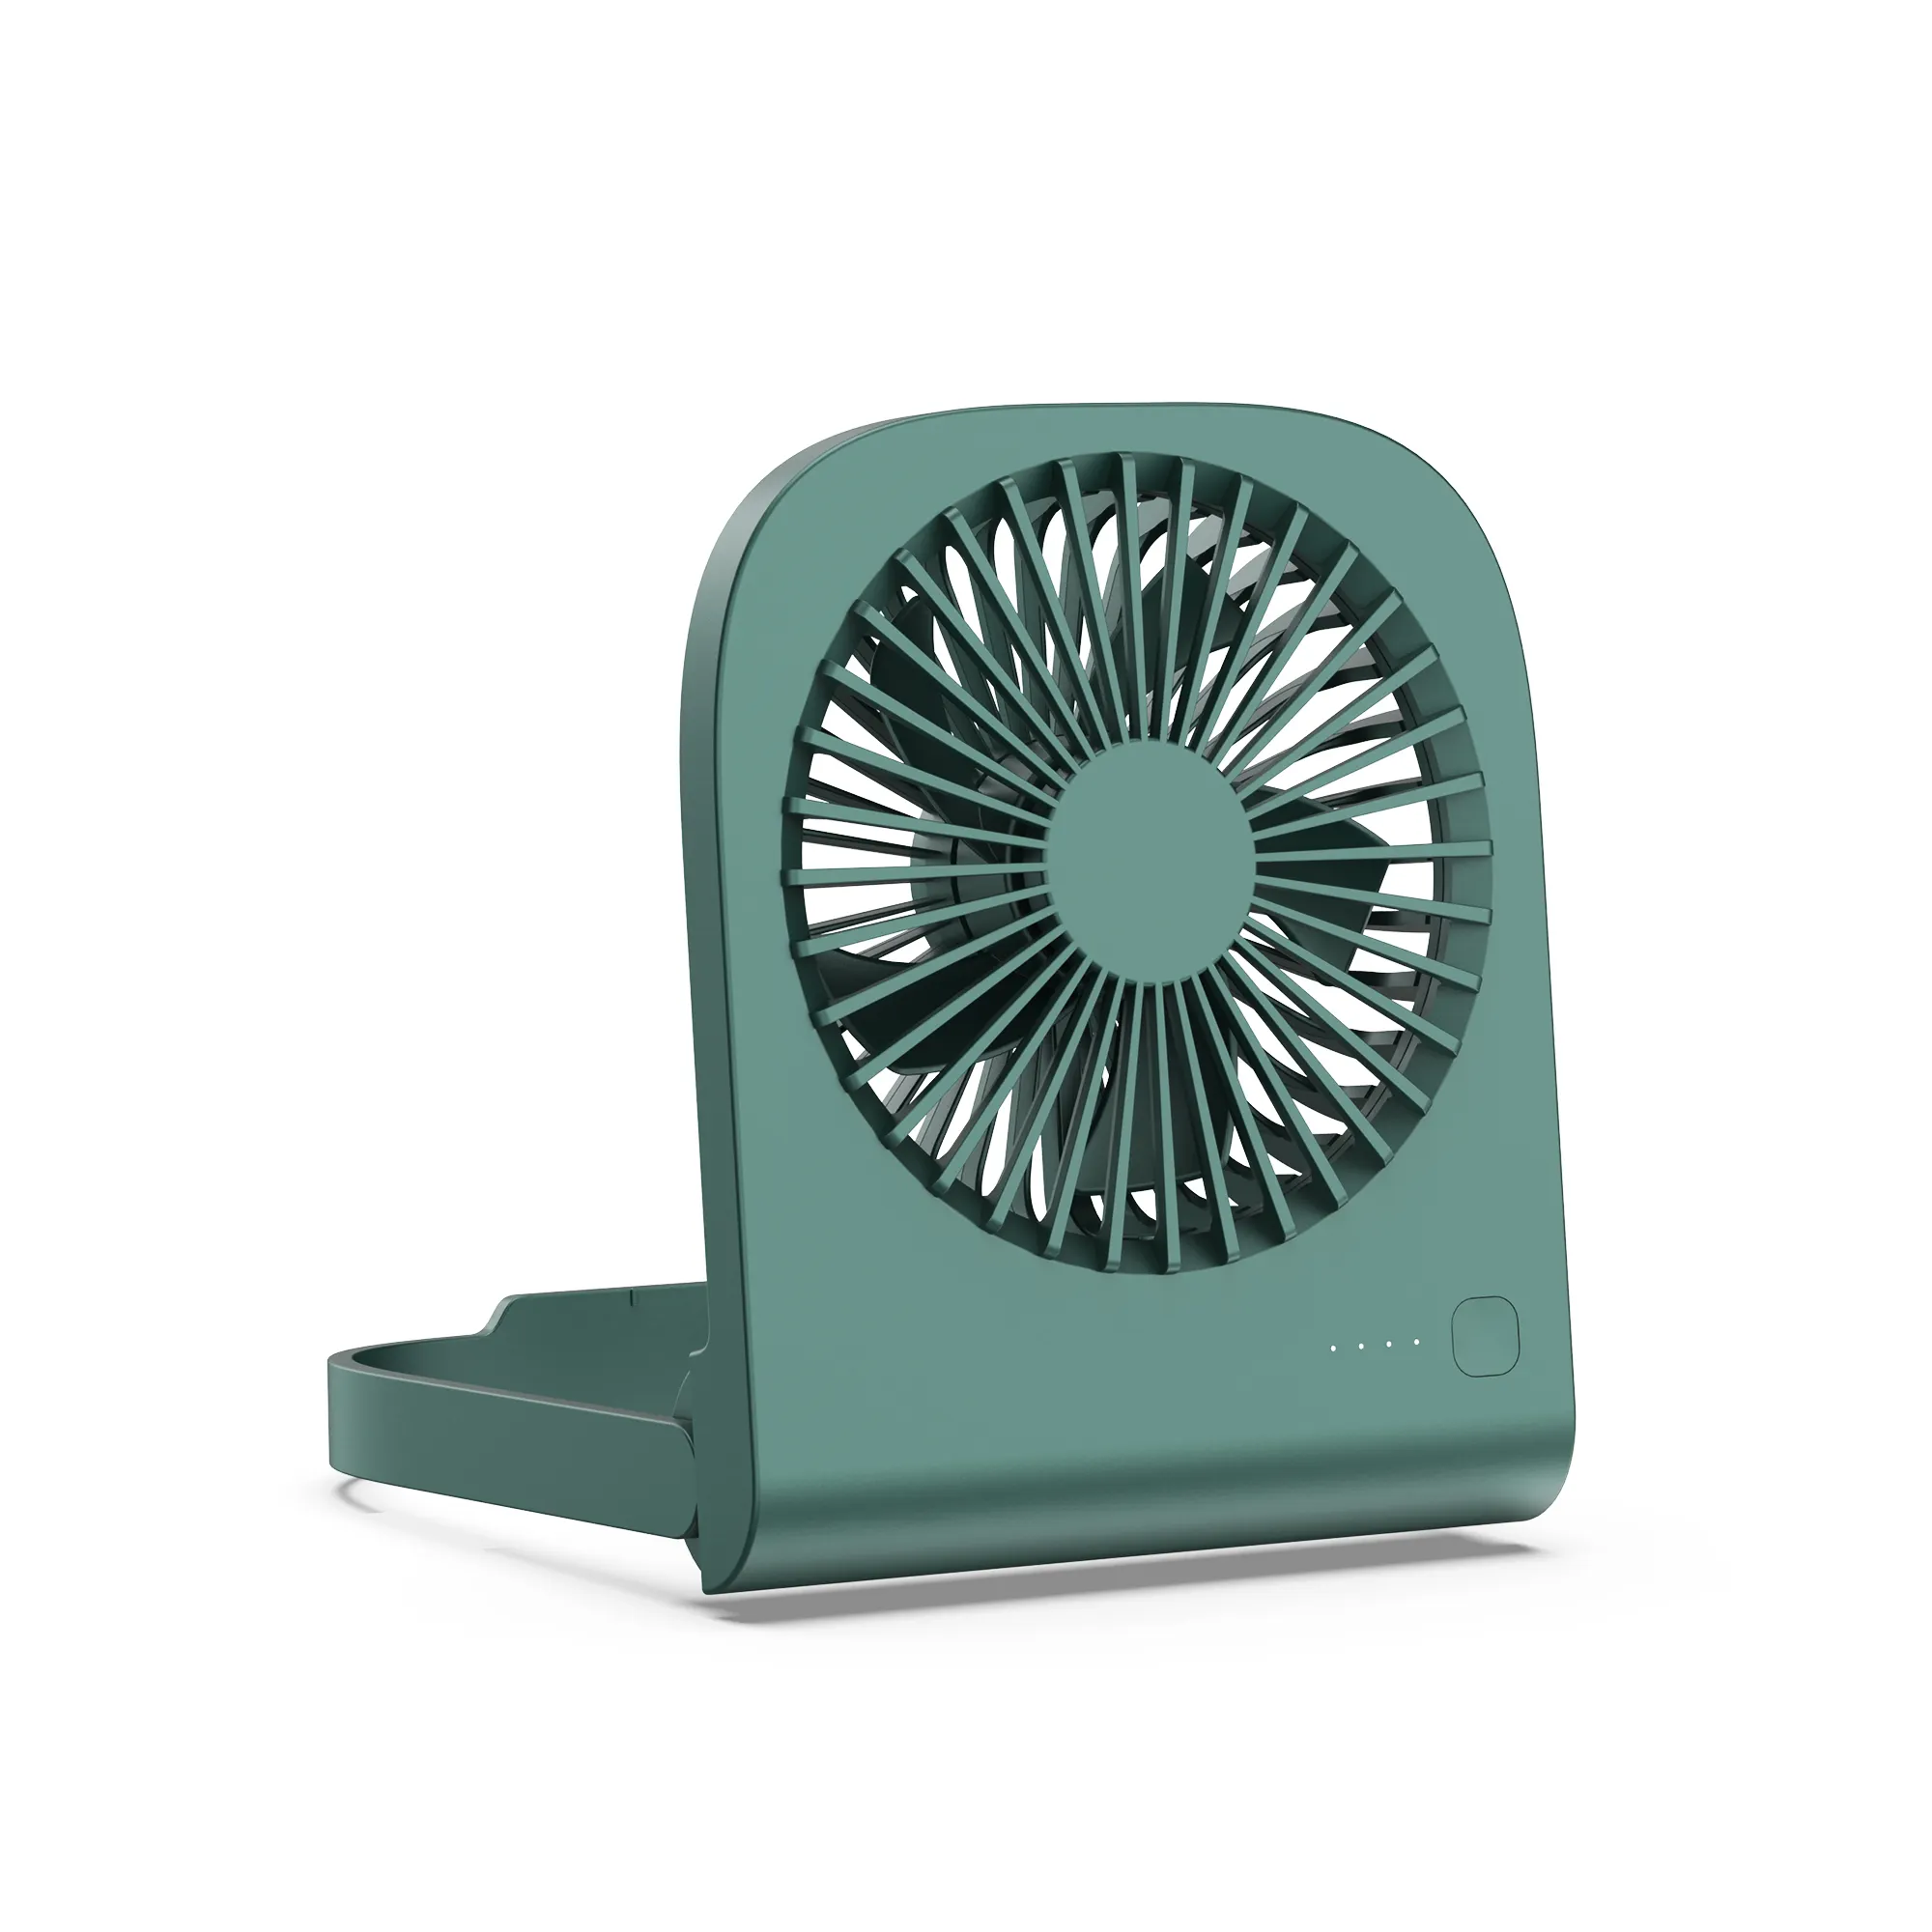 Foldable Fan Mini Portable Air Conditioner Air Cooler Electric Hand Usb Table Cooling Travel Small Fan Desk Fan